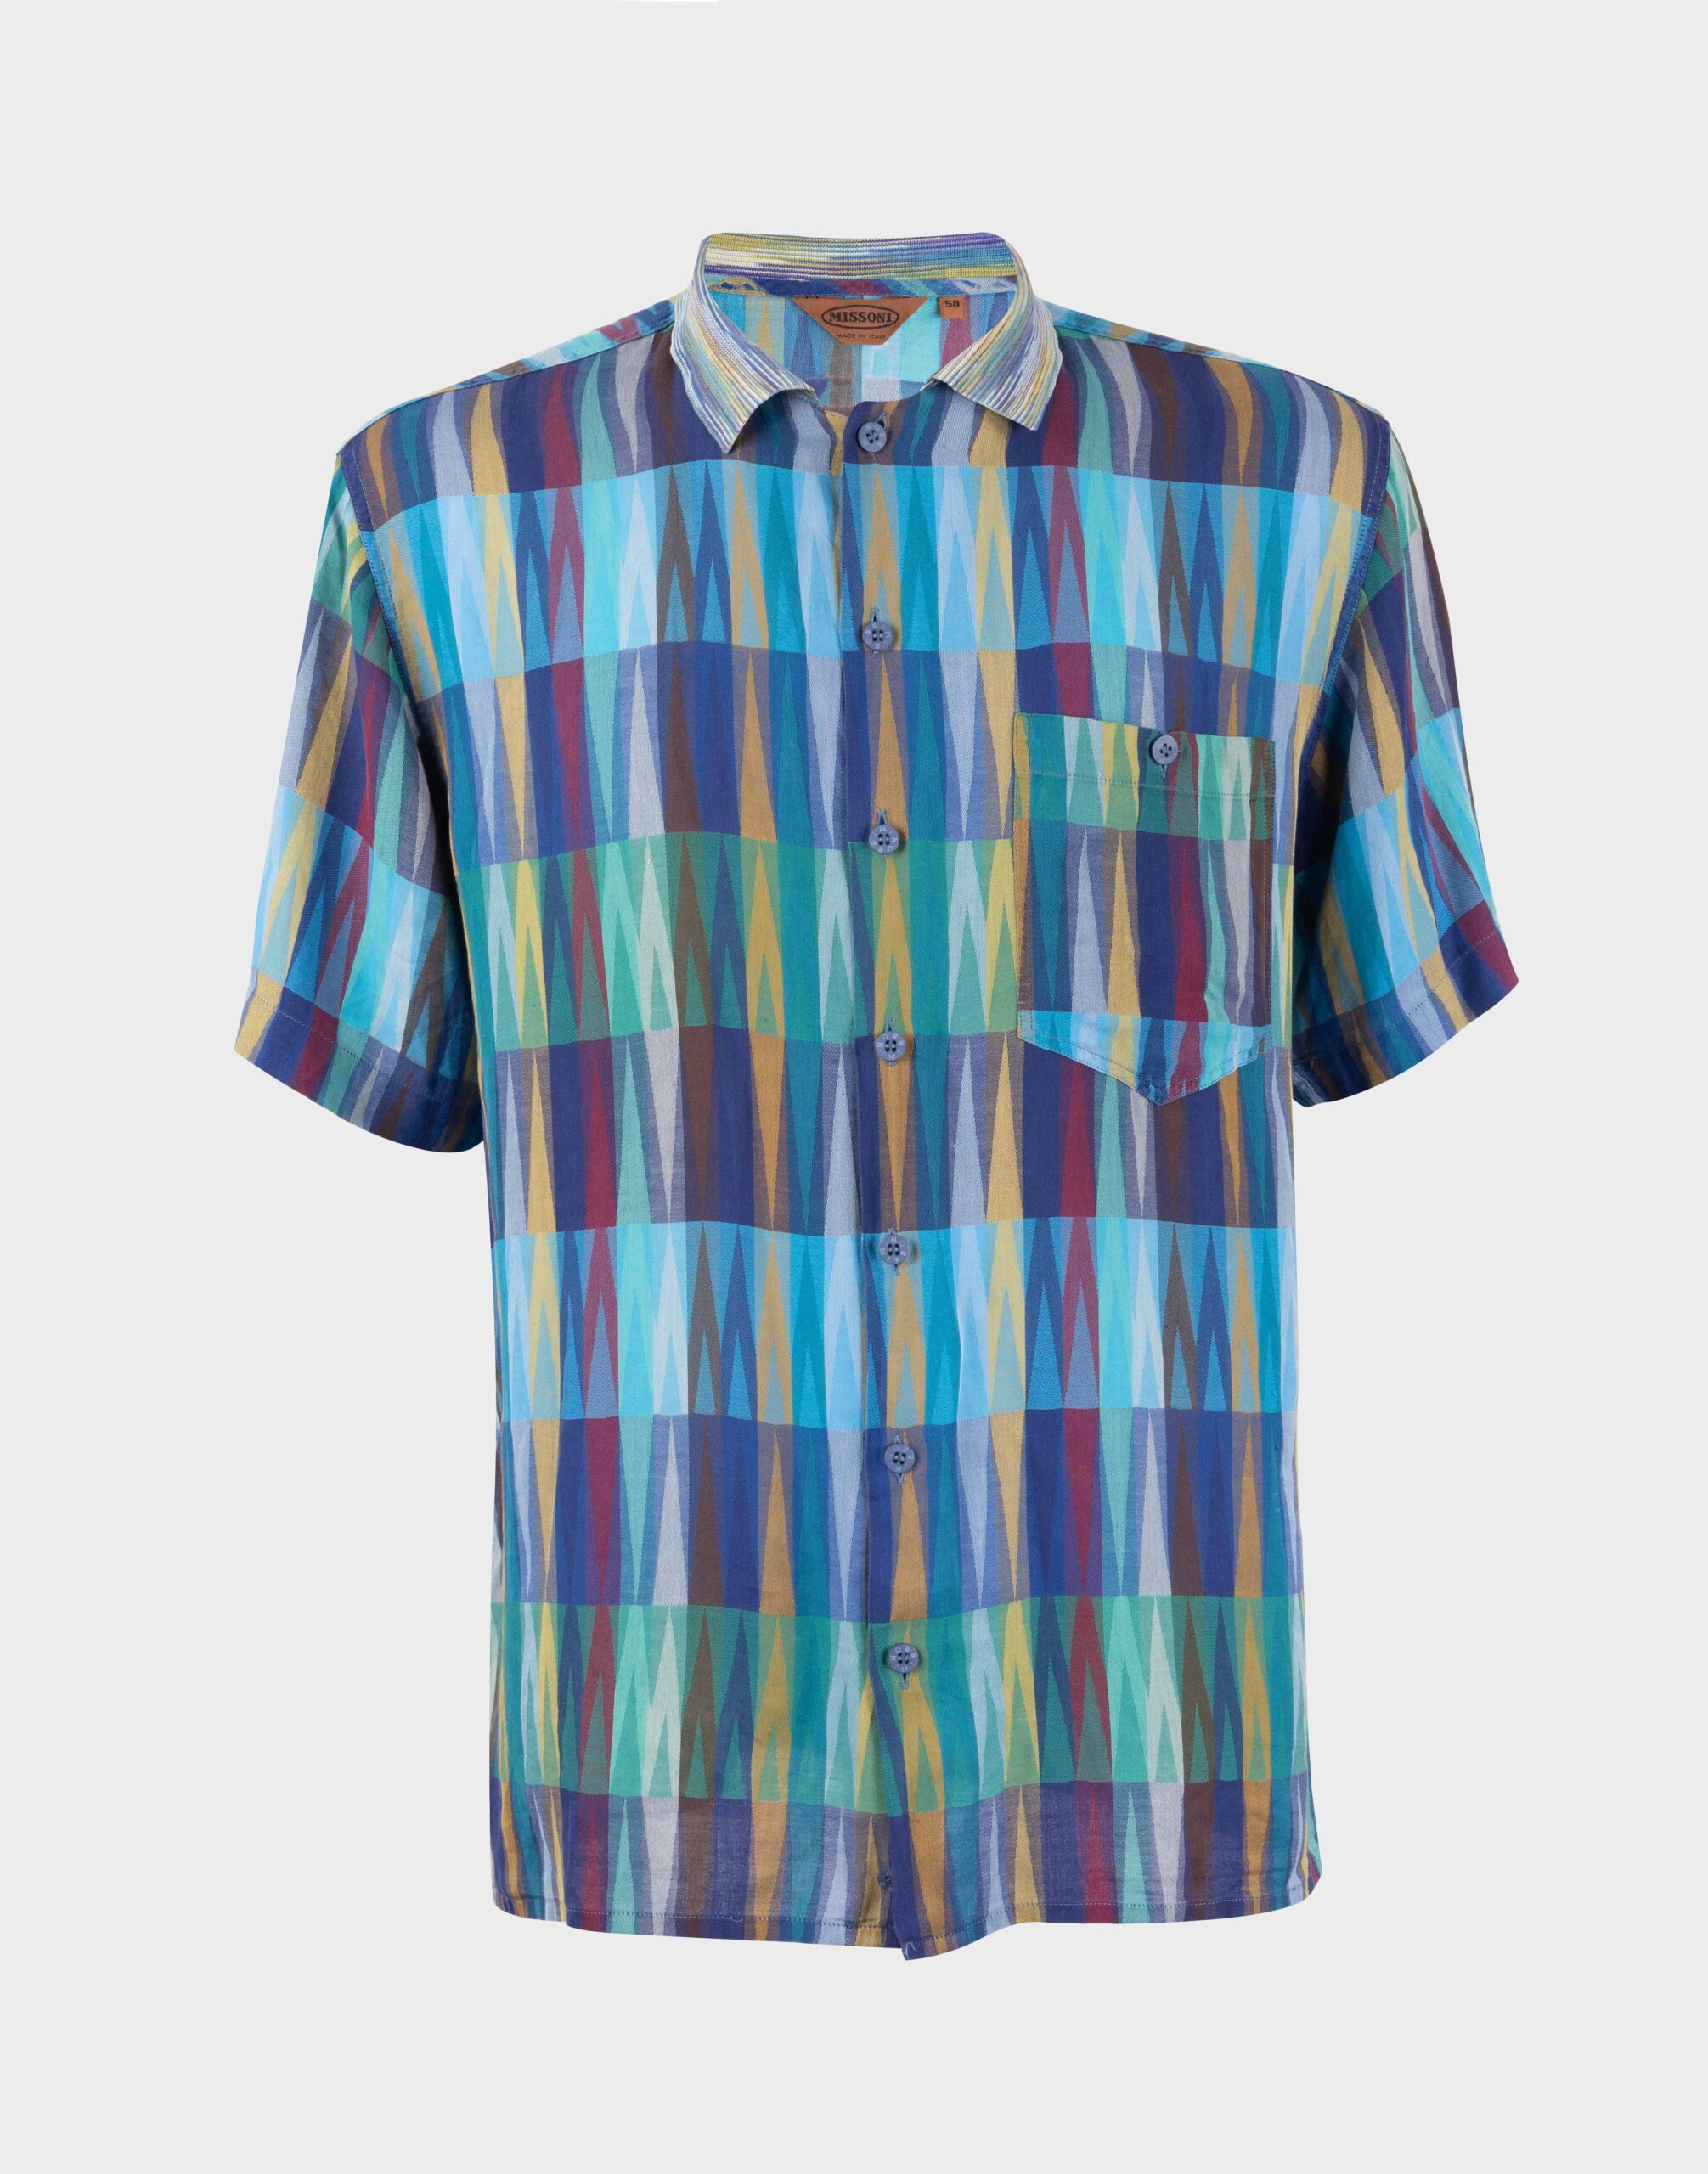 Men's short-sleeved shirt in blue and light blue with multicolored pattern, polo-style collar